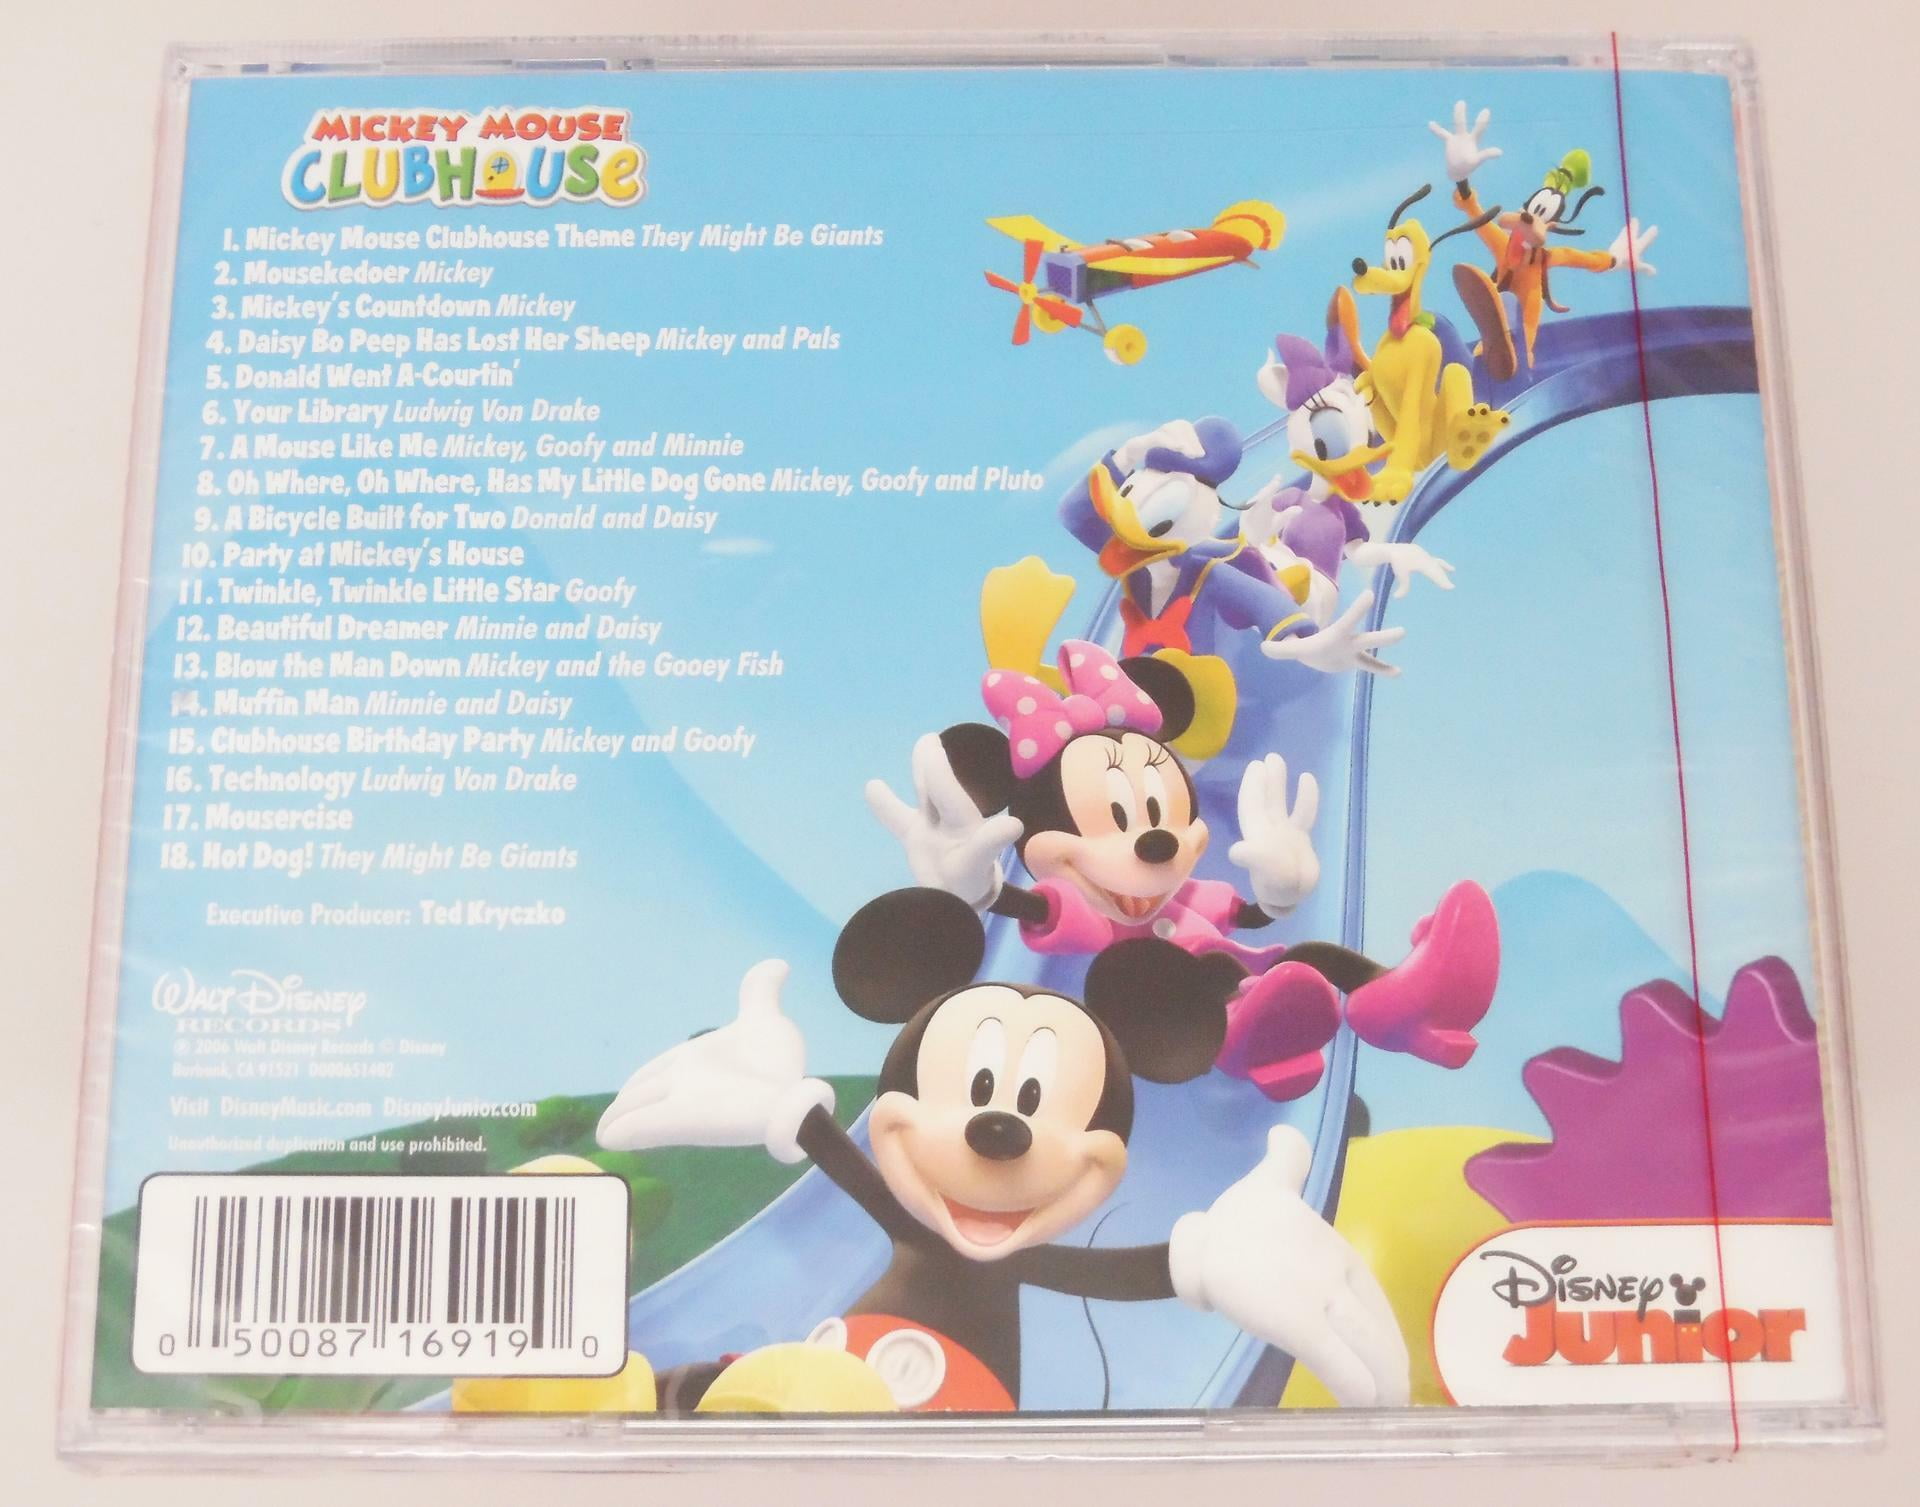 Disney - Mickey Mouse Clubhouse -  Music